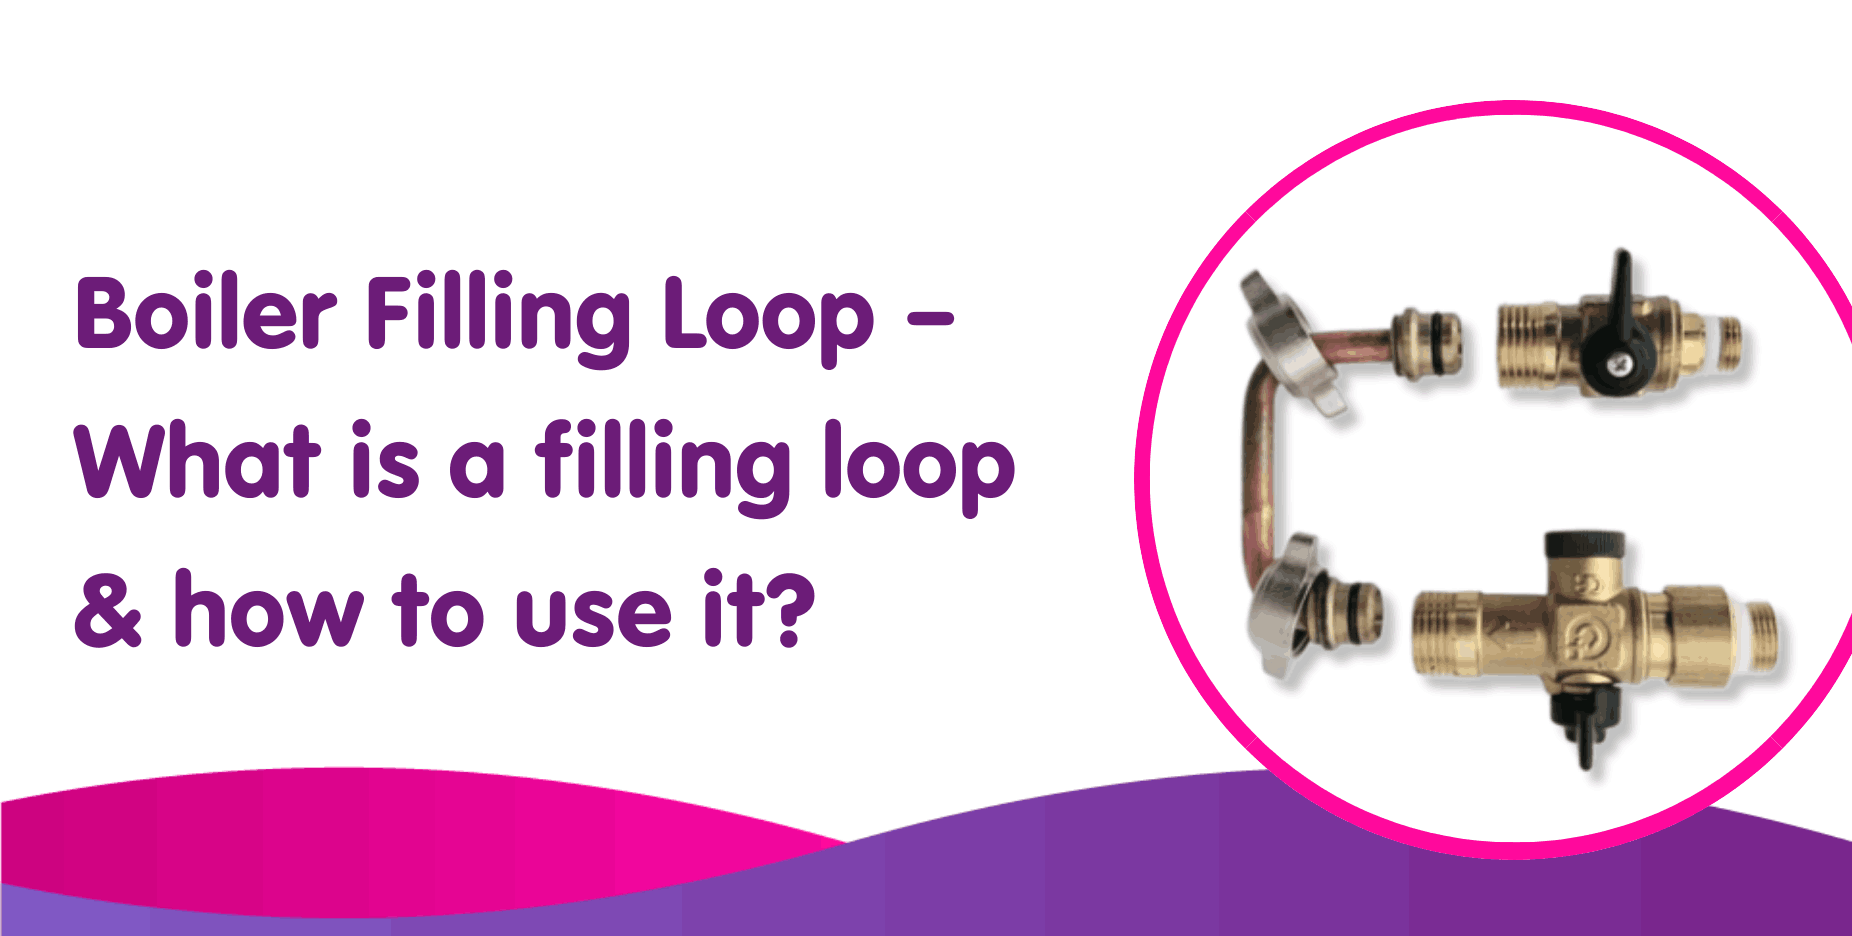 Boiler Filling Loop – What is a filling loop & how to use it